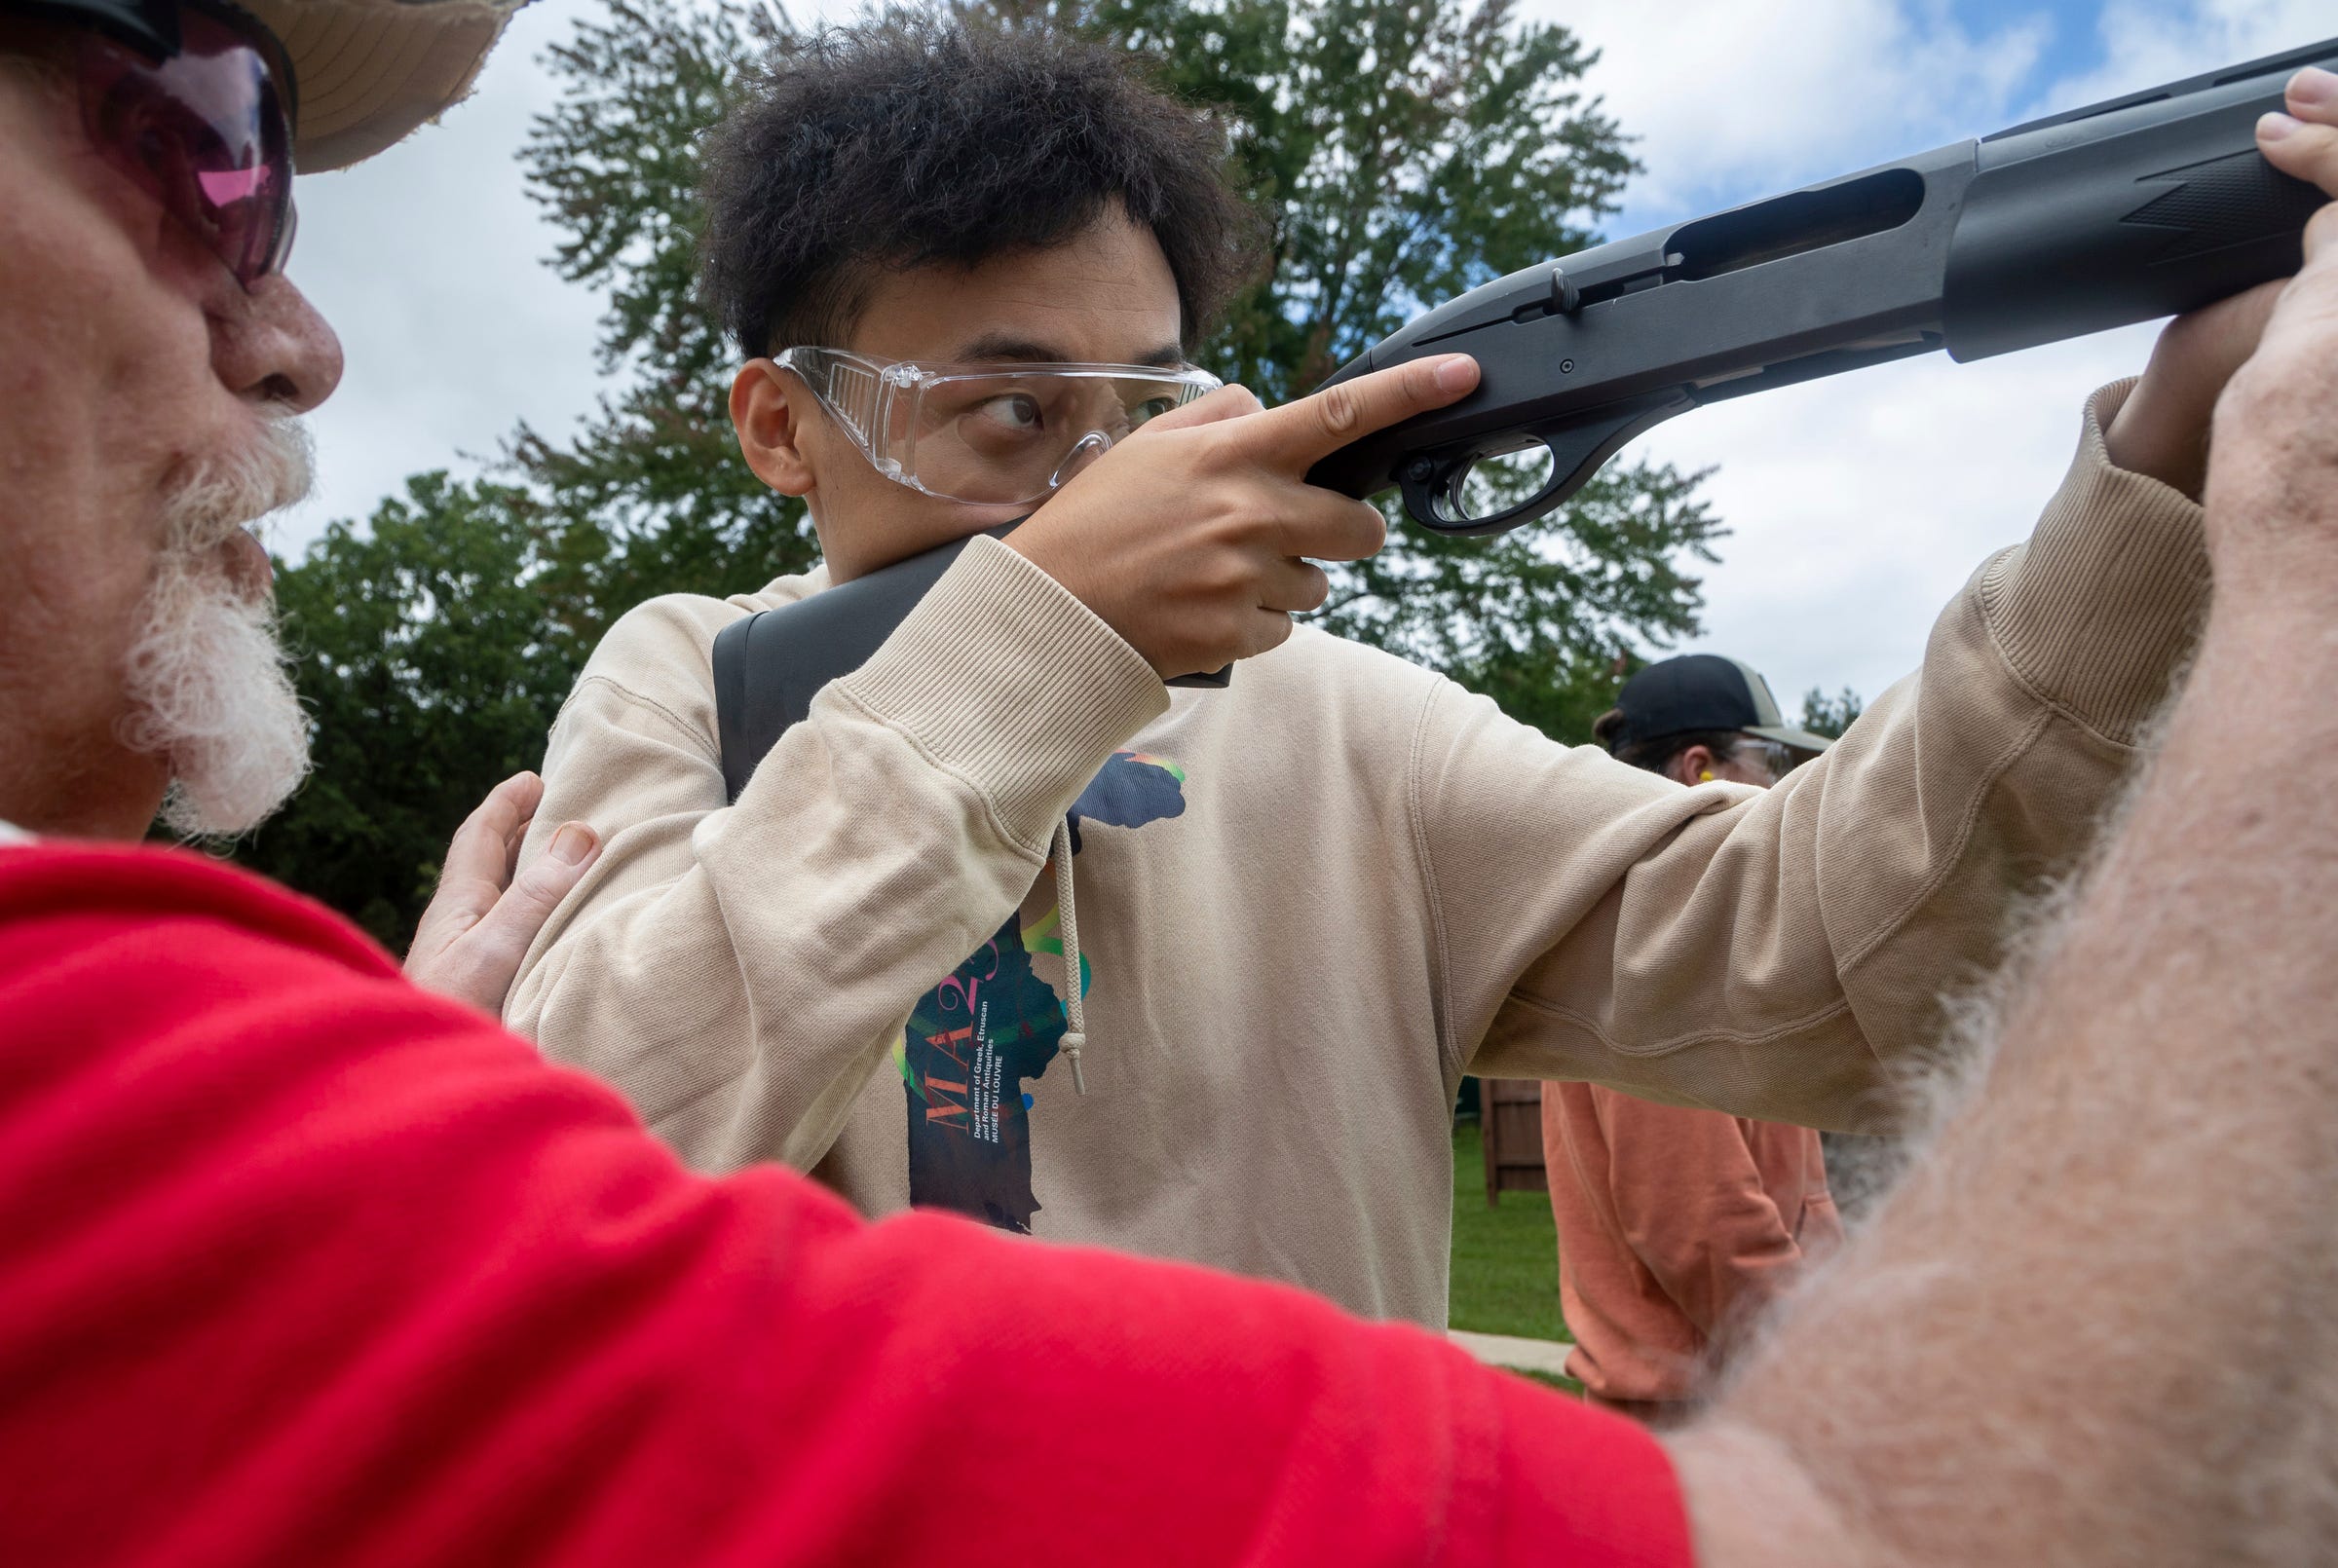 Yifei Jiang, a transfer student at the University of Michigan, prepares to shoot a clay target during a Hunter Safety Field Day at the Washtenaw Sportsman